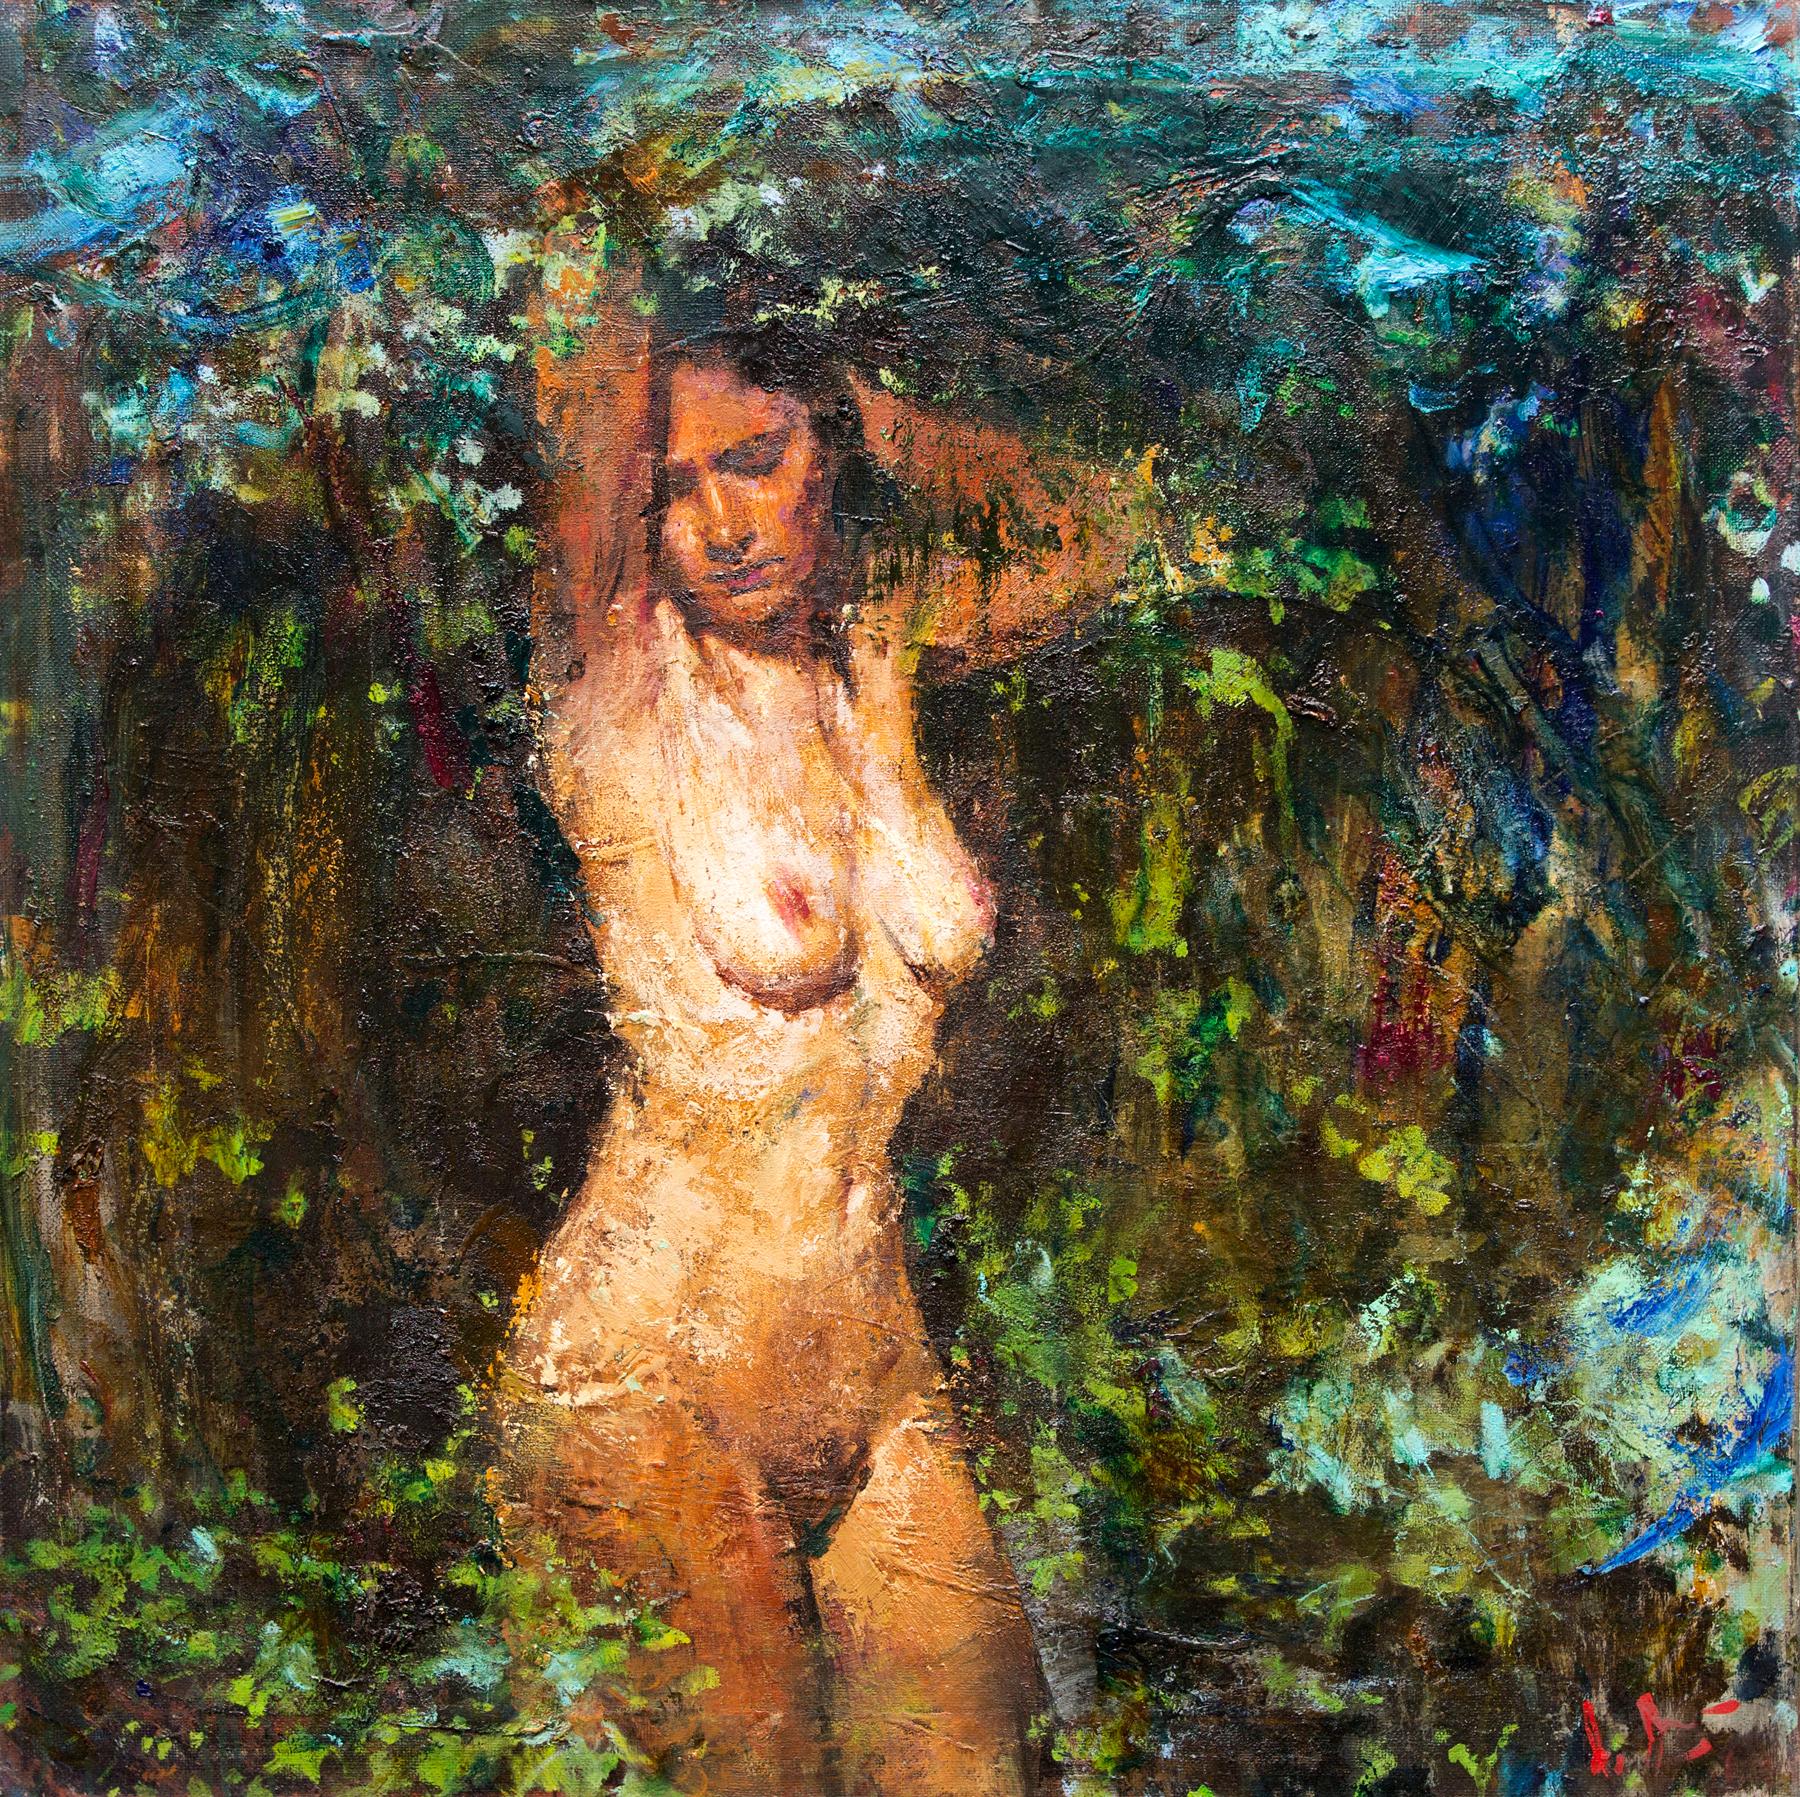 Nude in the forest